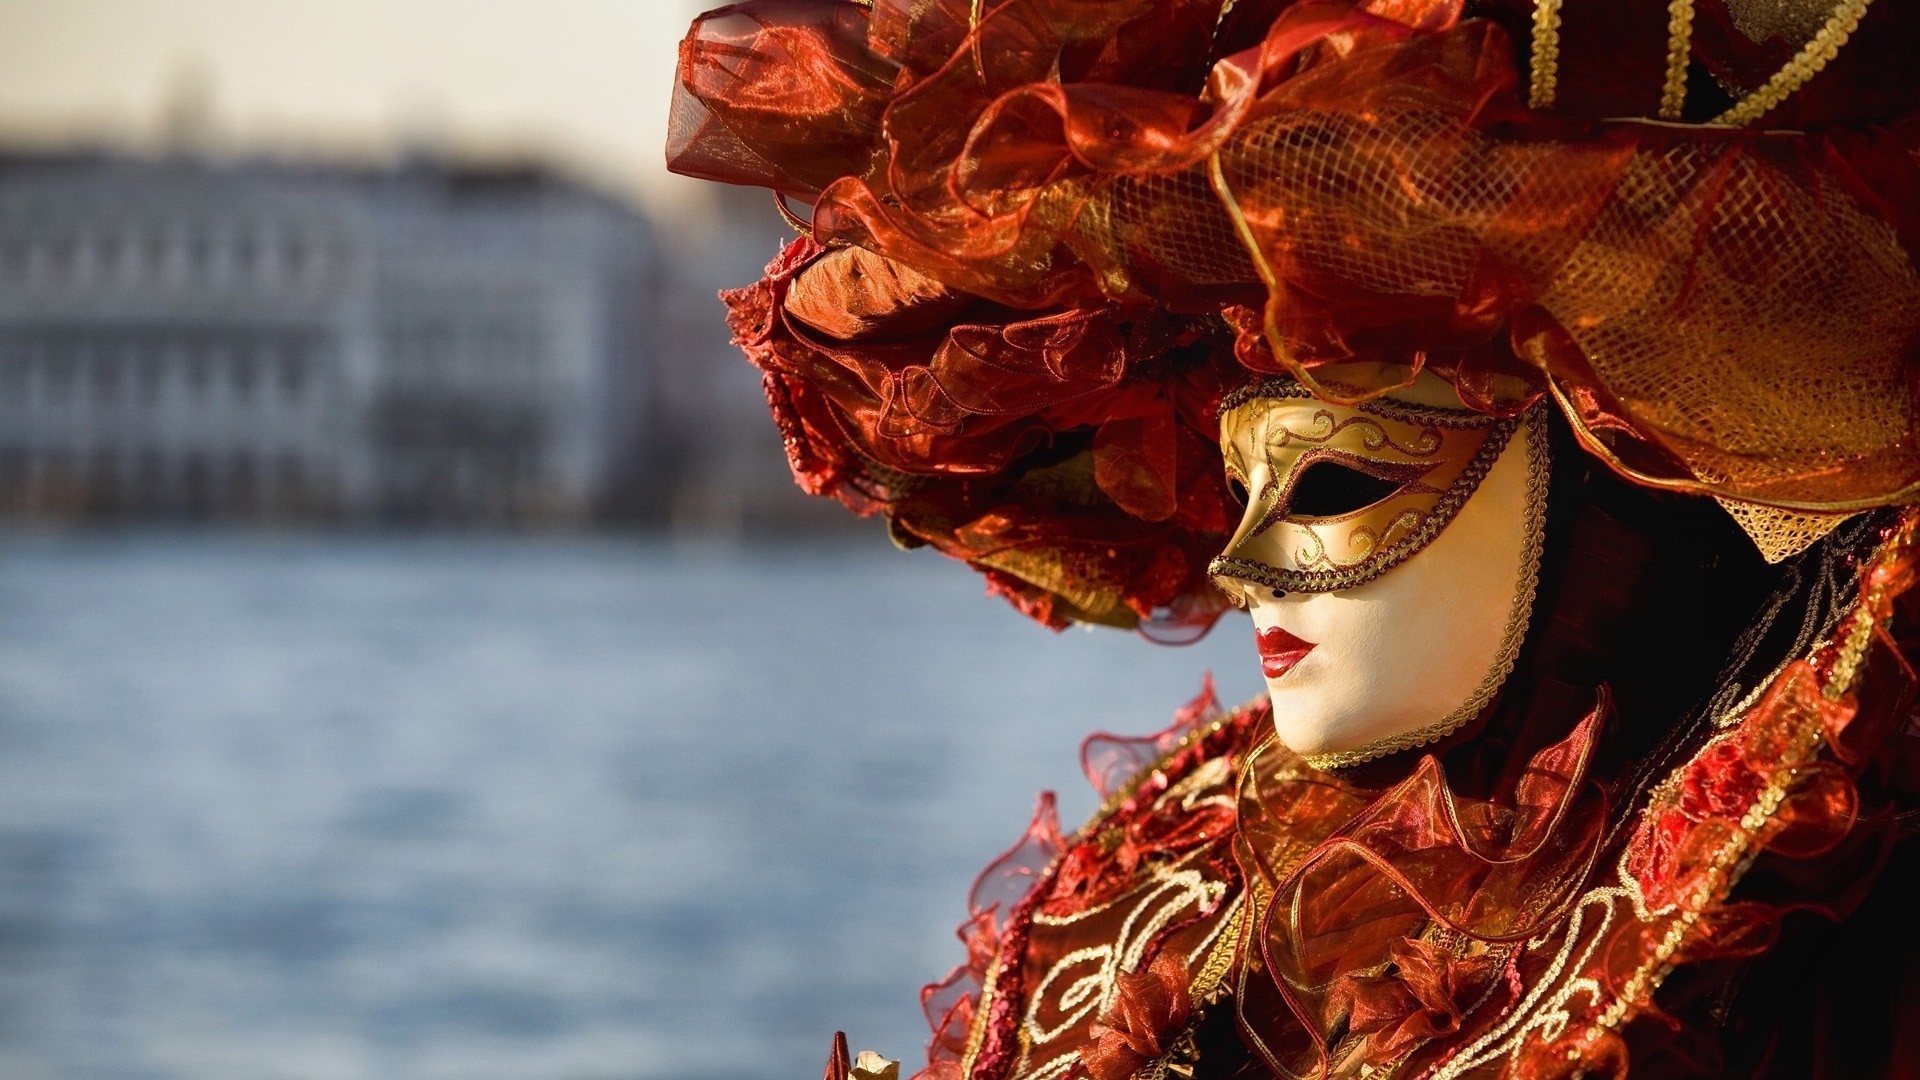 Hottest Tips When Visiting the Venice Carnival 2015